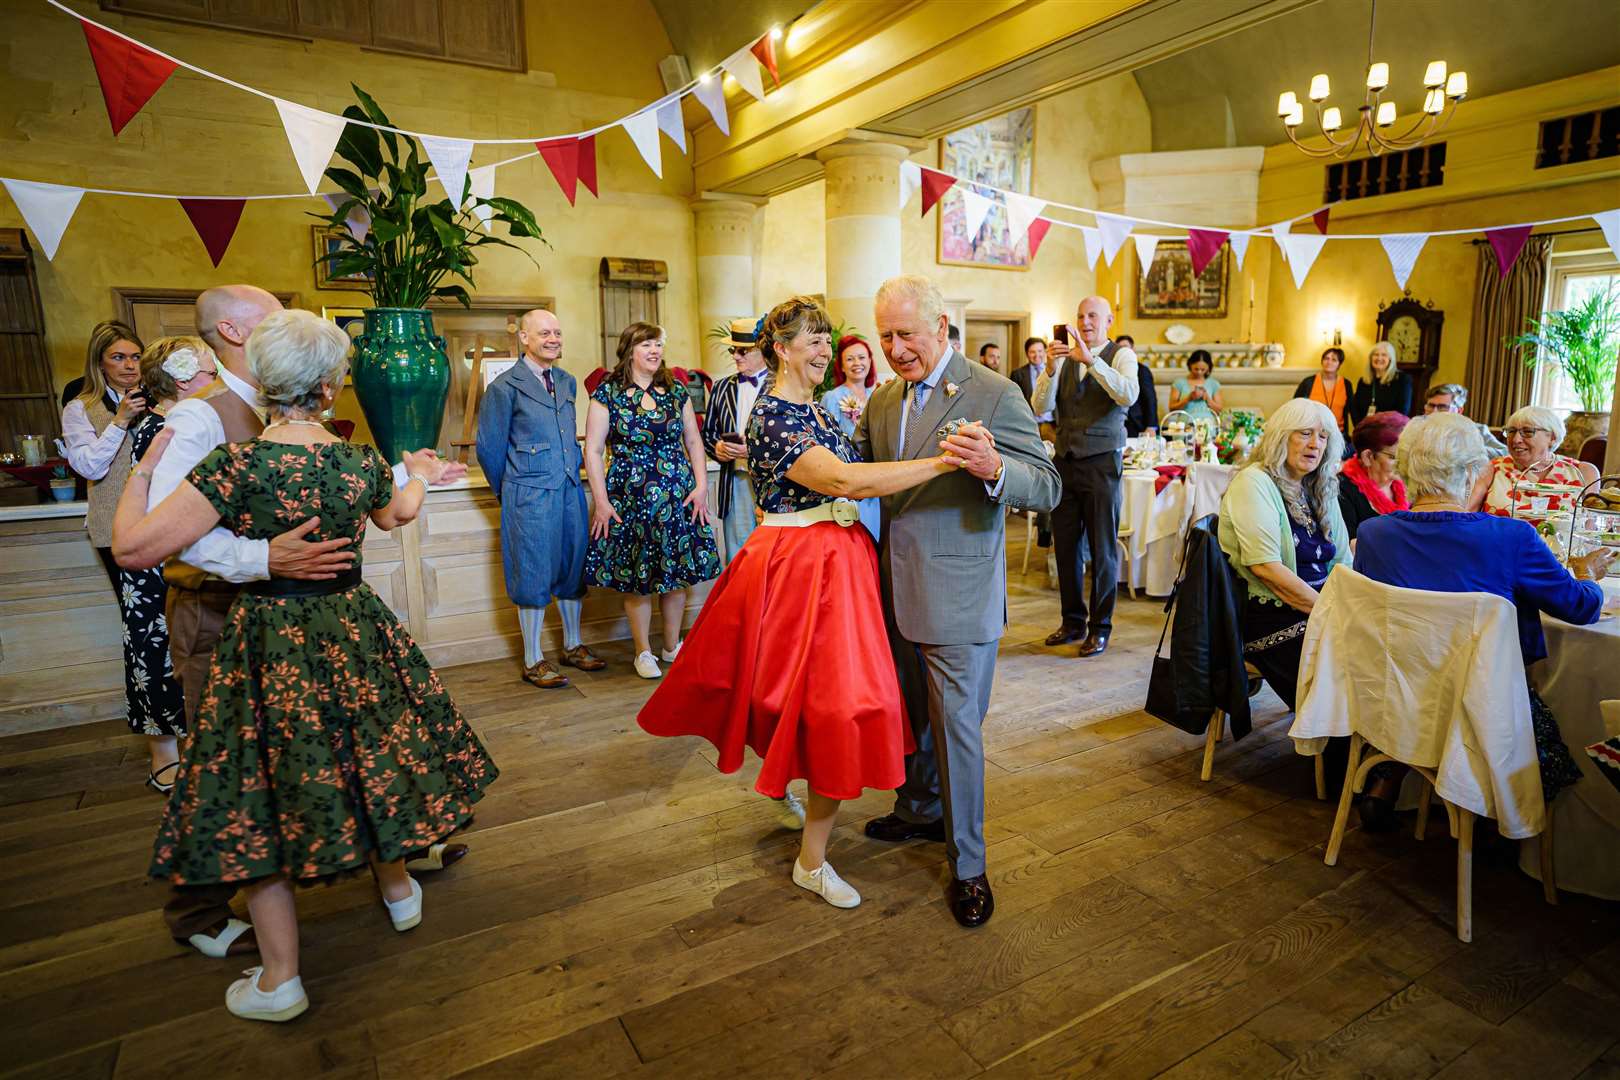 Charles dances with Bridget Tibbs during a Jubilee tea dance hosted by The Prince’s Foundation to mark the Platinum Jubilee (Ben Birchall/PA)